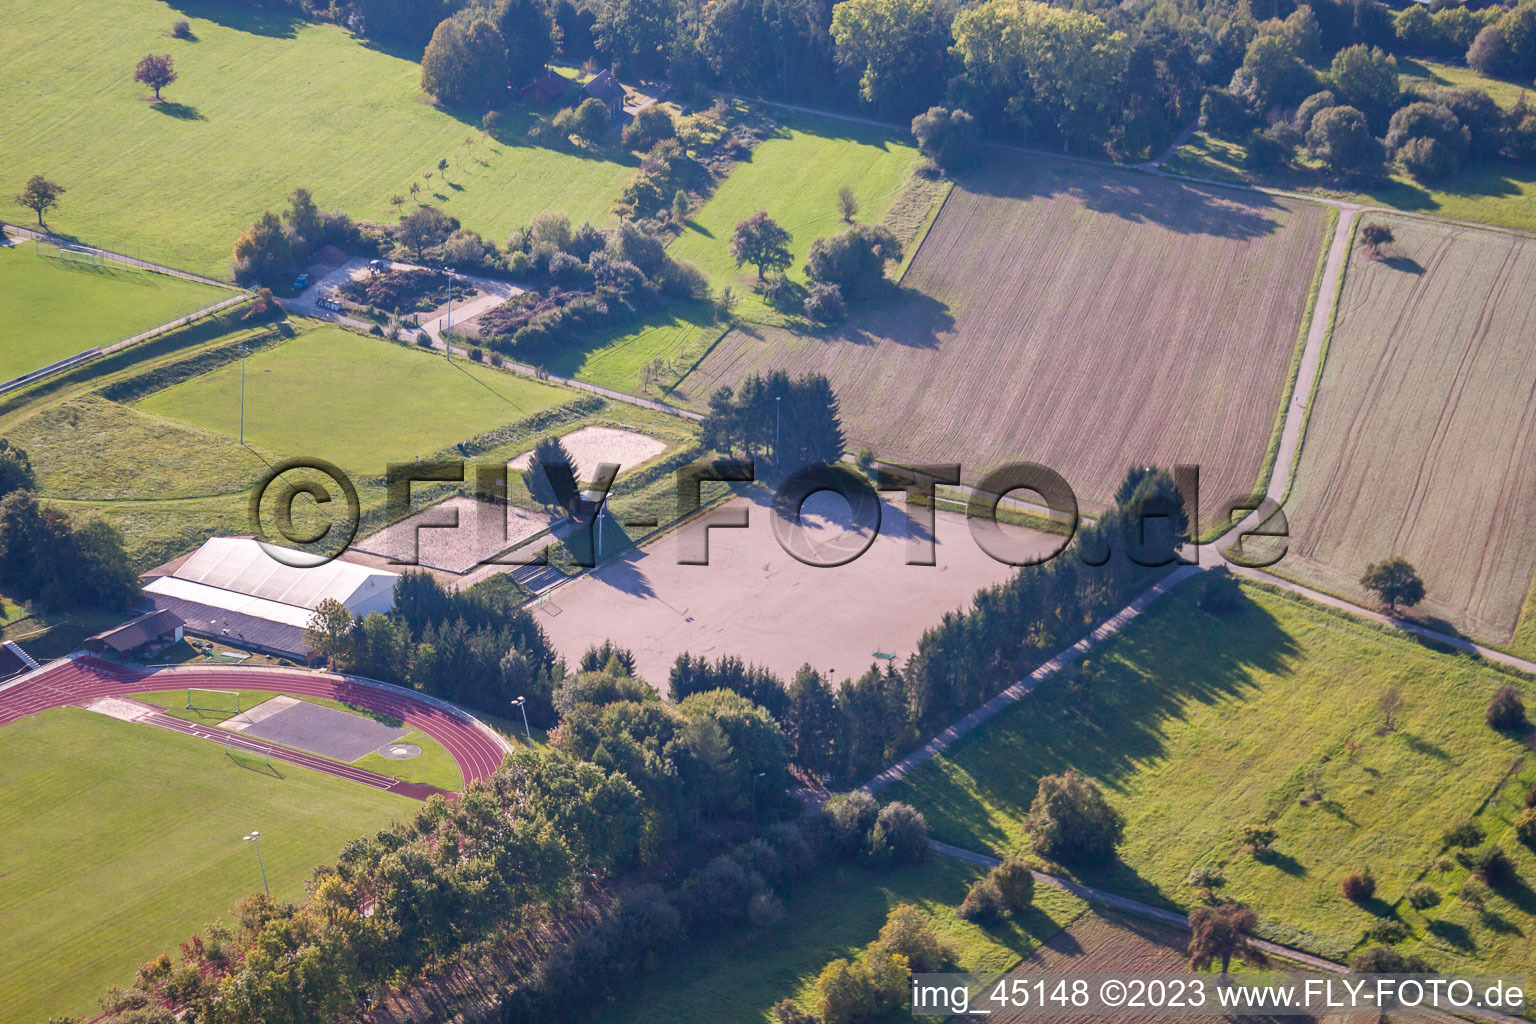 Drone recording of Sports grounds of SV-1899 eV Langensteinbach in the district Langensteinbach in Karlsbad in the state Baden-Wuerttemberg, Germany